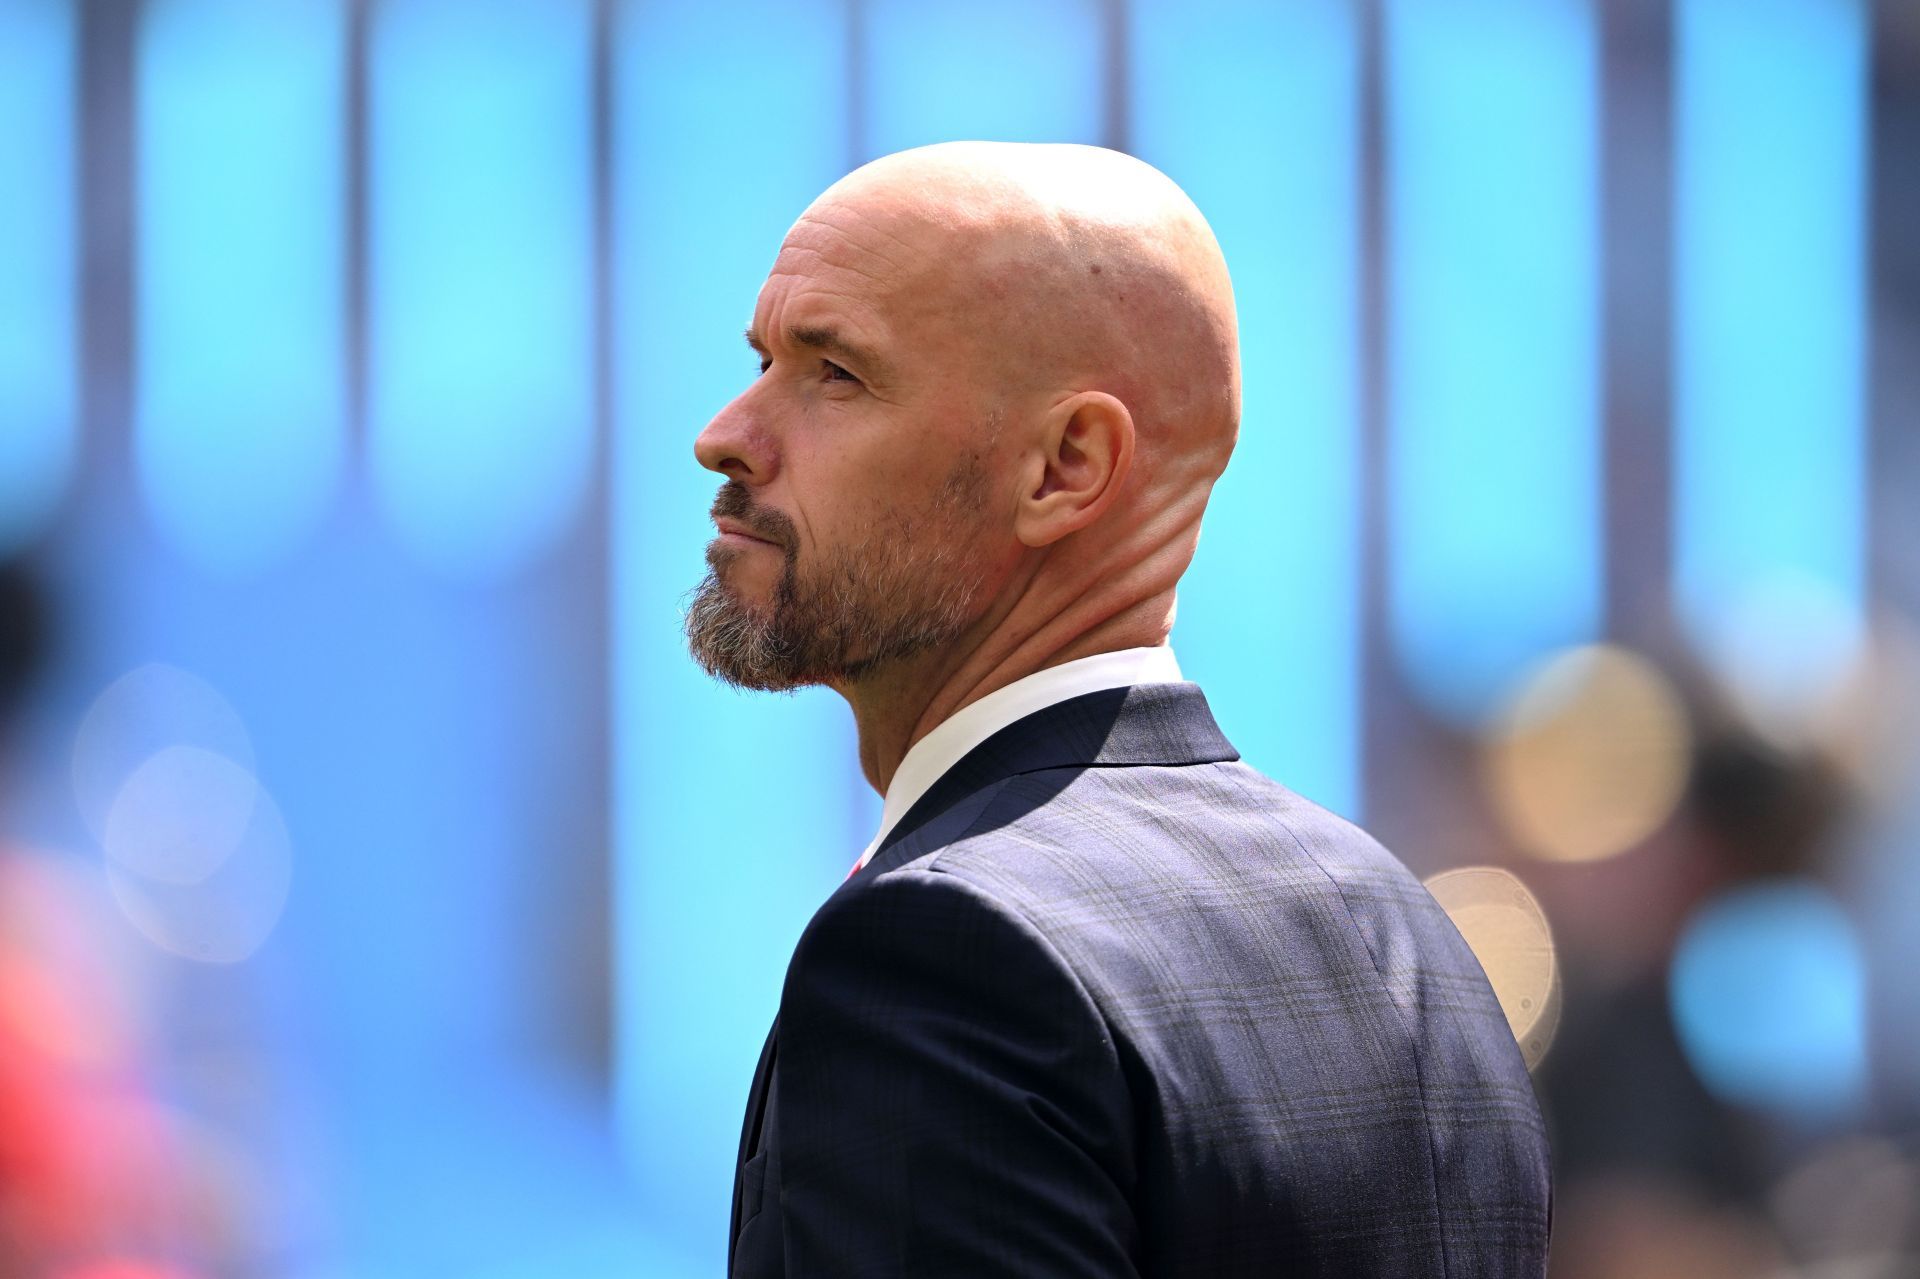 ten Hag criticised the fans for their lofty expectations.